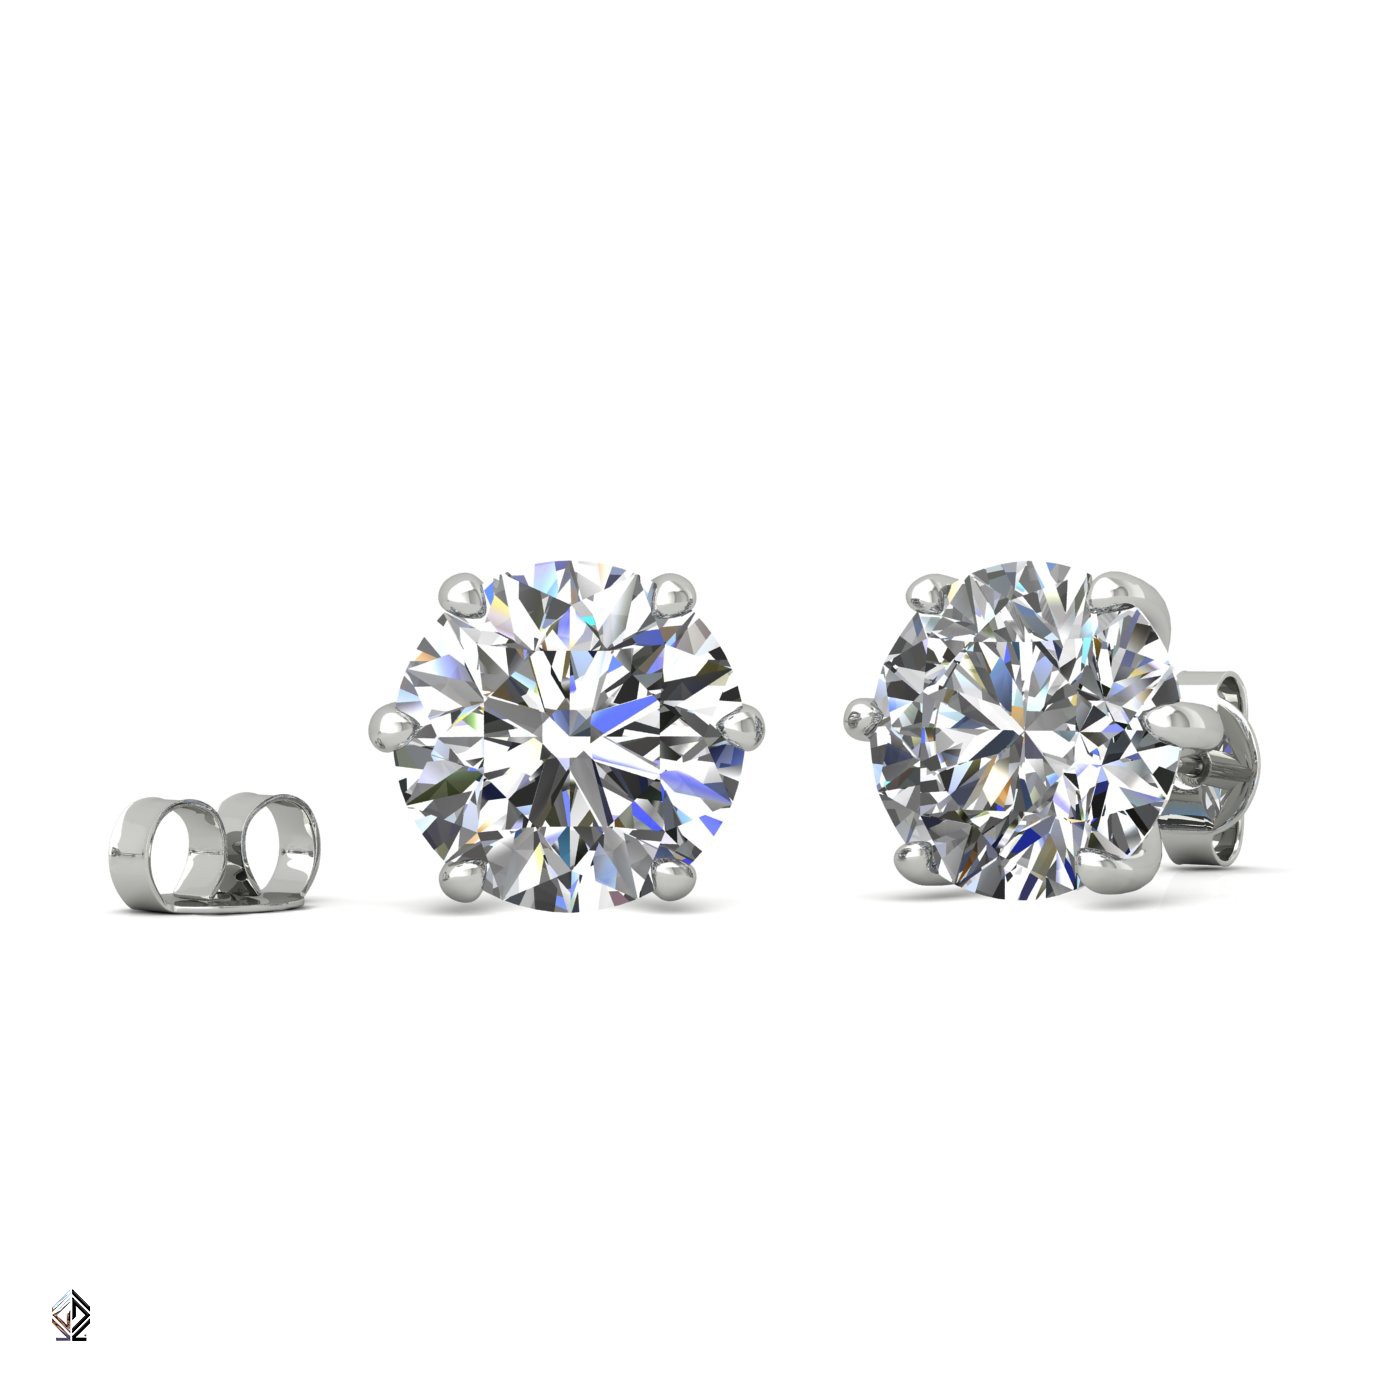 18k white gold 1.5 ct each (3,0 tcw) 6 prongs round shape diamond earrings Photos & images